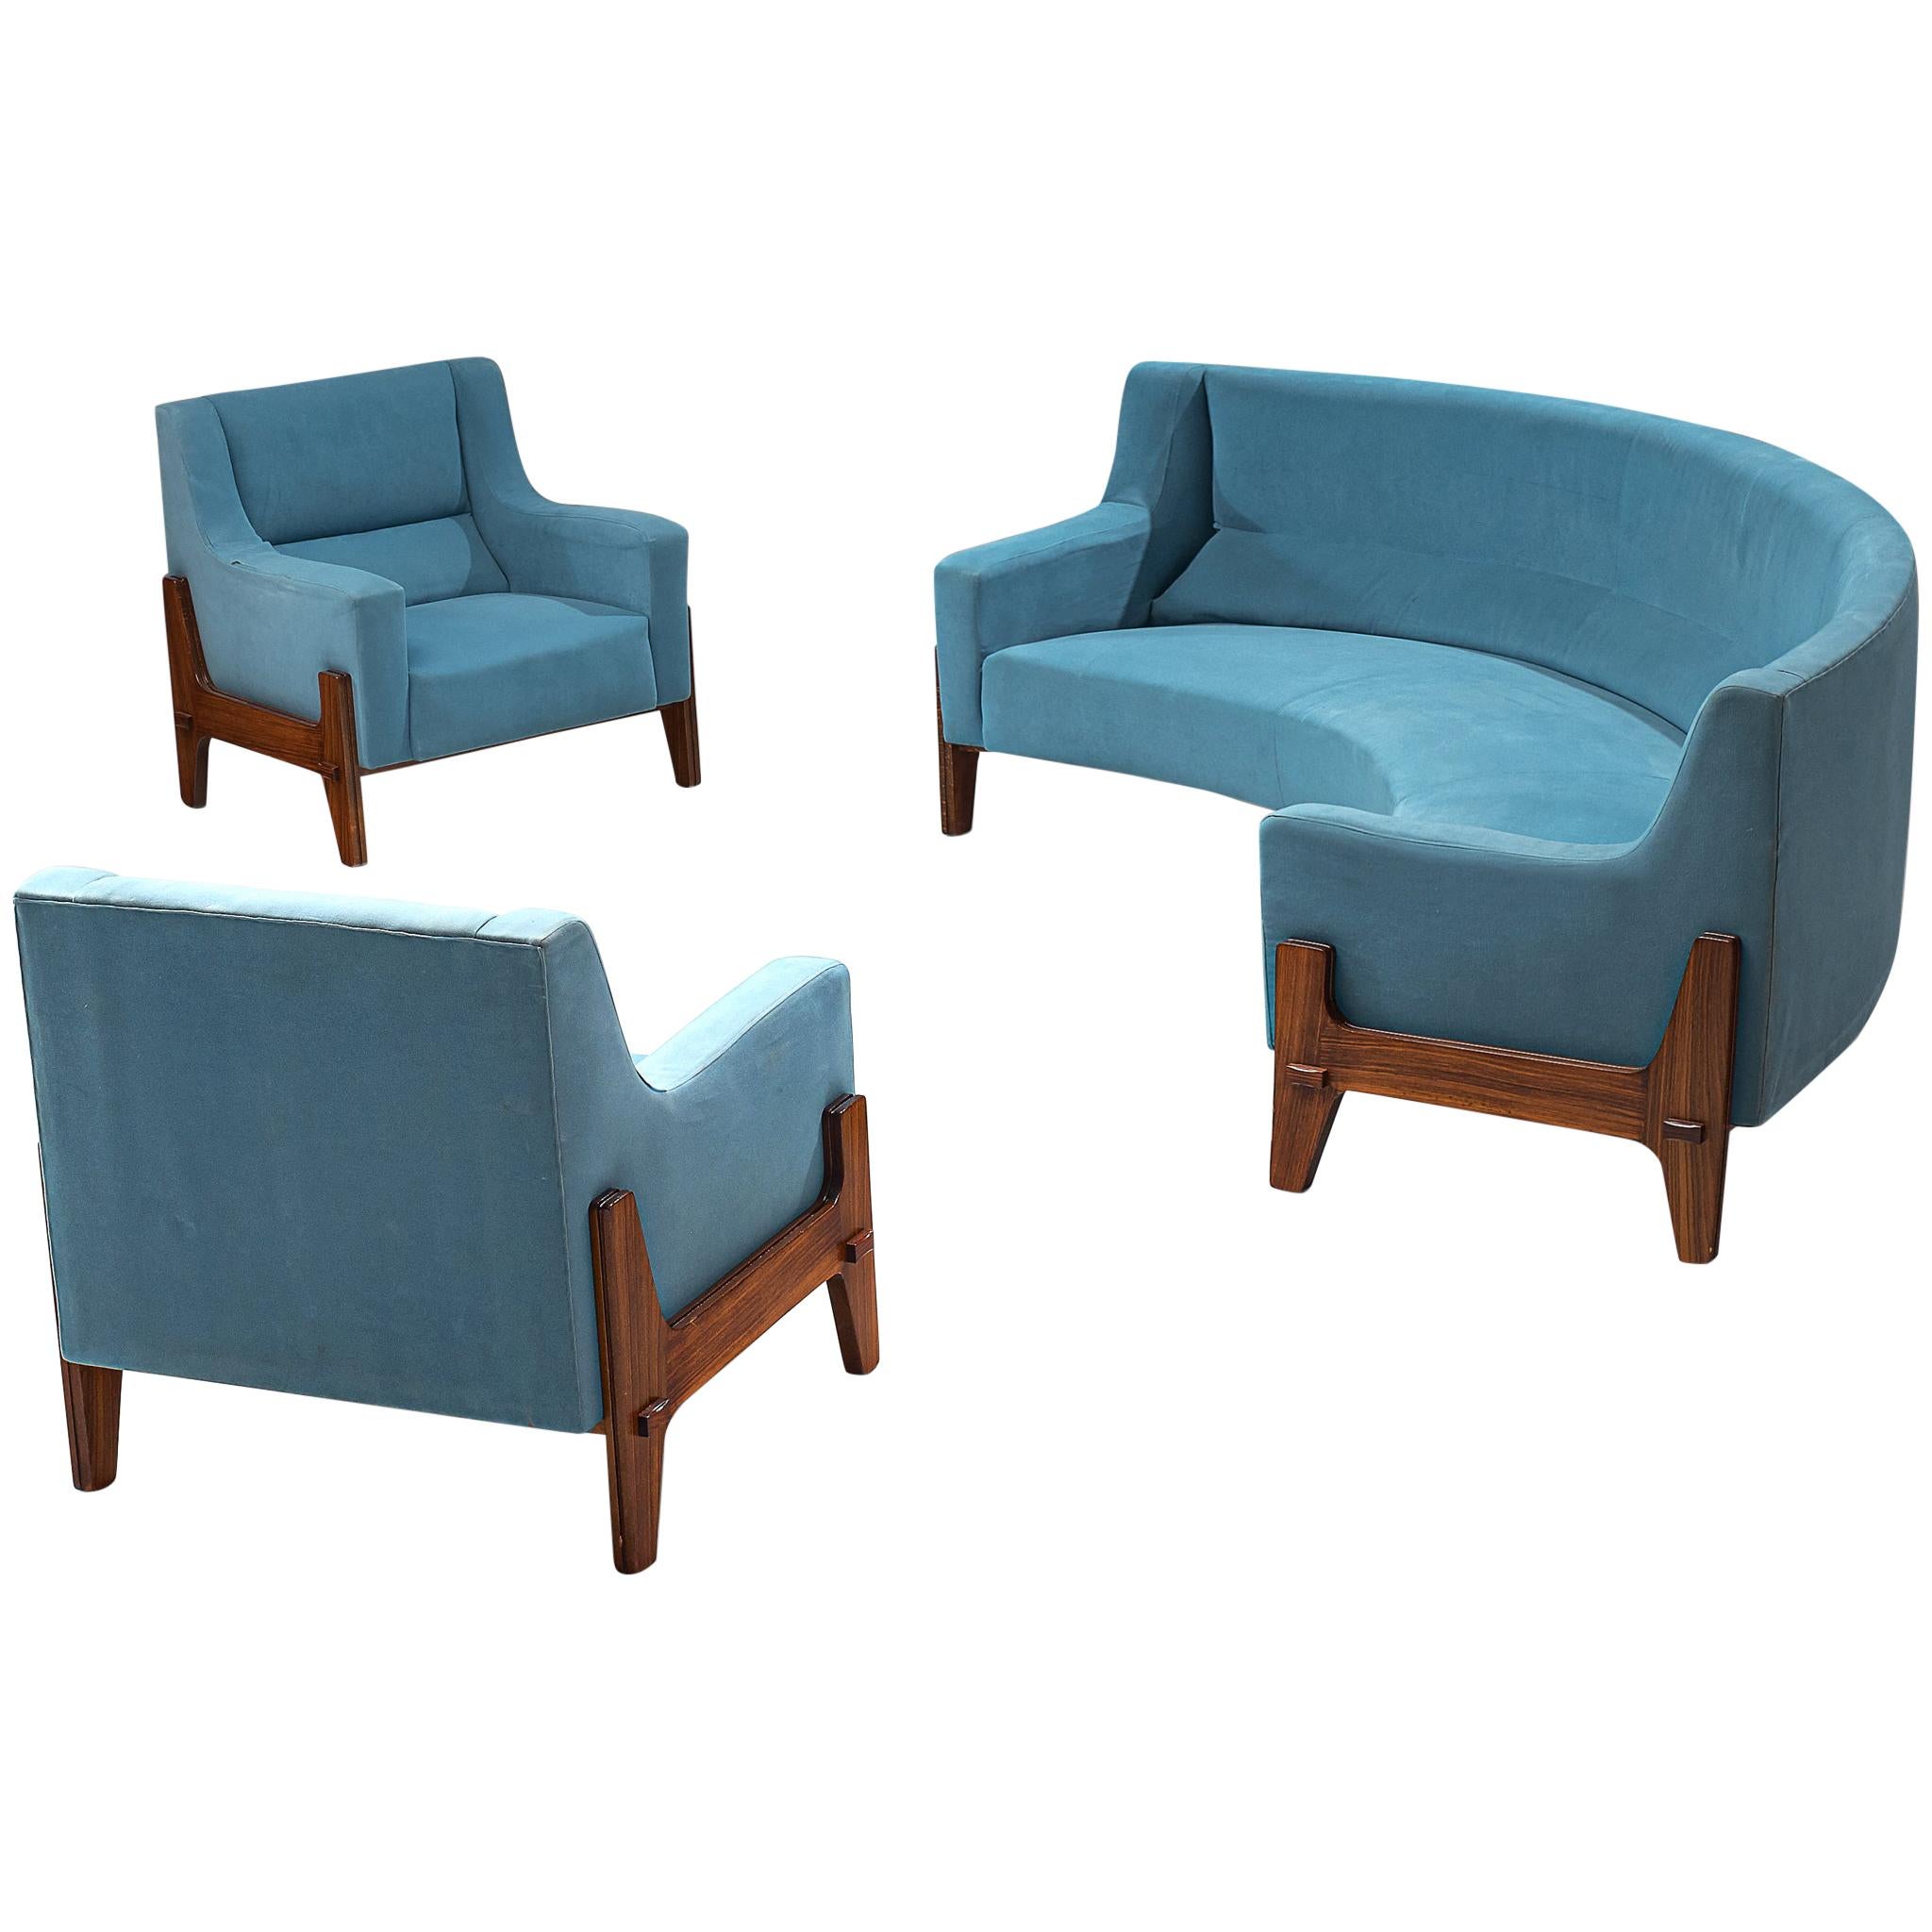 Italian Living Room Set in Rosewood and Sky Blue Upholstery